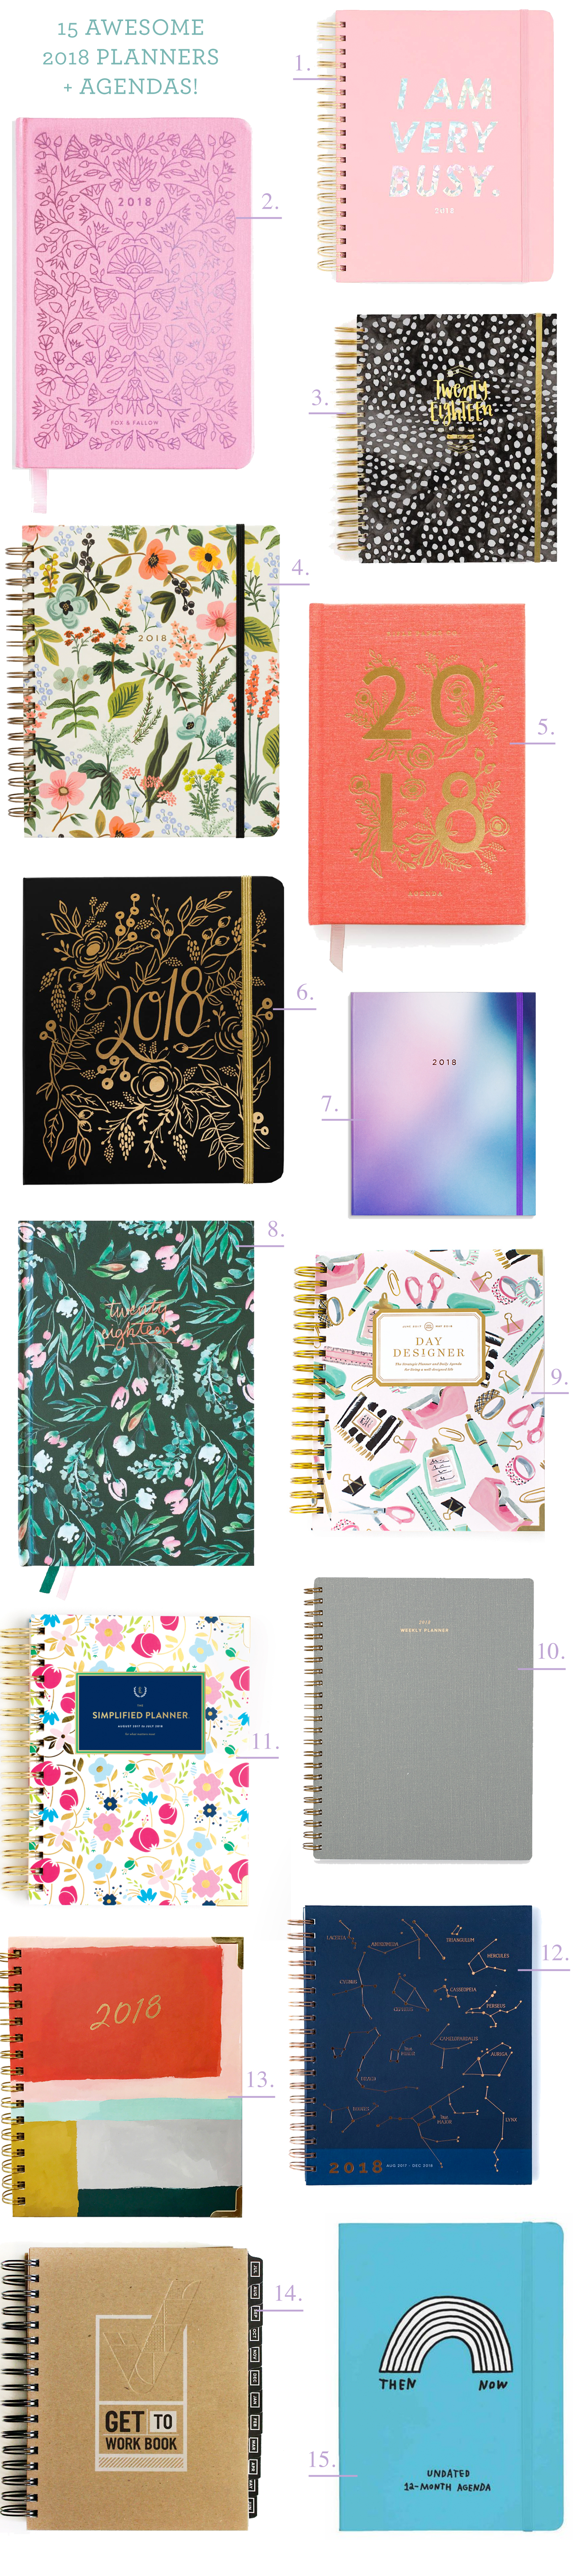 Origineel Modderig ramp Fifteen Awesome 2017-2018 Planners and Agendas!